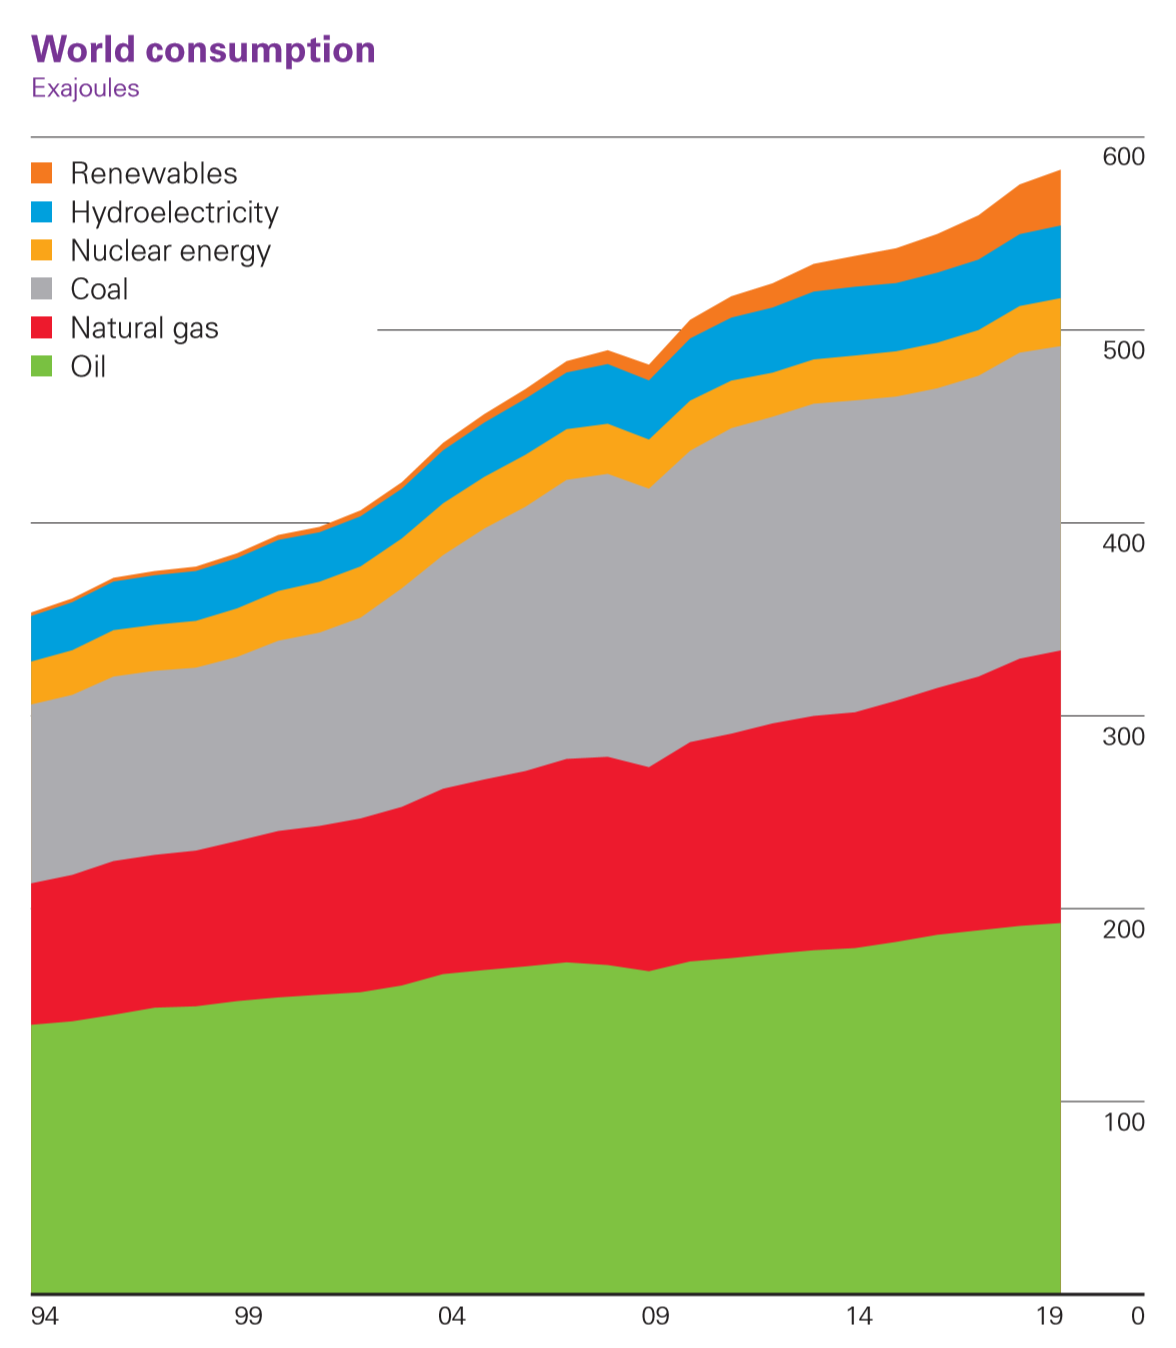 World consumption of primary energy in exajoules, 1994-2019. Primary energy consumption rose by 1.3 percent in 2019, less than half its rate in 2018 (2.8 percent). Growth was driven by renewables (3.2 EJ) and natural gas (2.8 EJ), which  together contributed three quarters of the increase. All fuels grew at a slower rate than their 10-year averages, apart from nuclear, with coal consumption falling for the fourth time in six years (-0.9 EJ). By region, consumption fell in North America, Europe and CIS, and growth was below average in South and Central America. In the other regions, growth was roughly in line with historical averages. China was the biggest individual driver of primary energy growth, accounting for more than three  quarters of net global growth. Oil continues to hold the largest share of the energy mix (33.1 percent). Coal is the  second largest fuel but lost share in 2019 to account for 27.0 percent, its lowest  level since 2003. The share of both natural gas and renewables rose to record highs of 24.2 percent and 5.0 percent respectively. Renewables has now overtaken nuclear, which makes up only 4.3 percent of the energy mix. The share of hydroelectricity has been stable at around 6 percent for several years. Graphic: BP